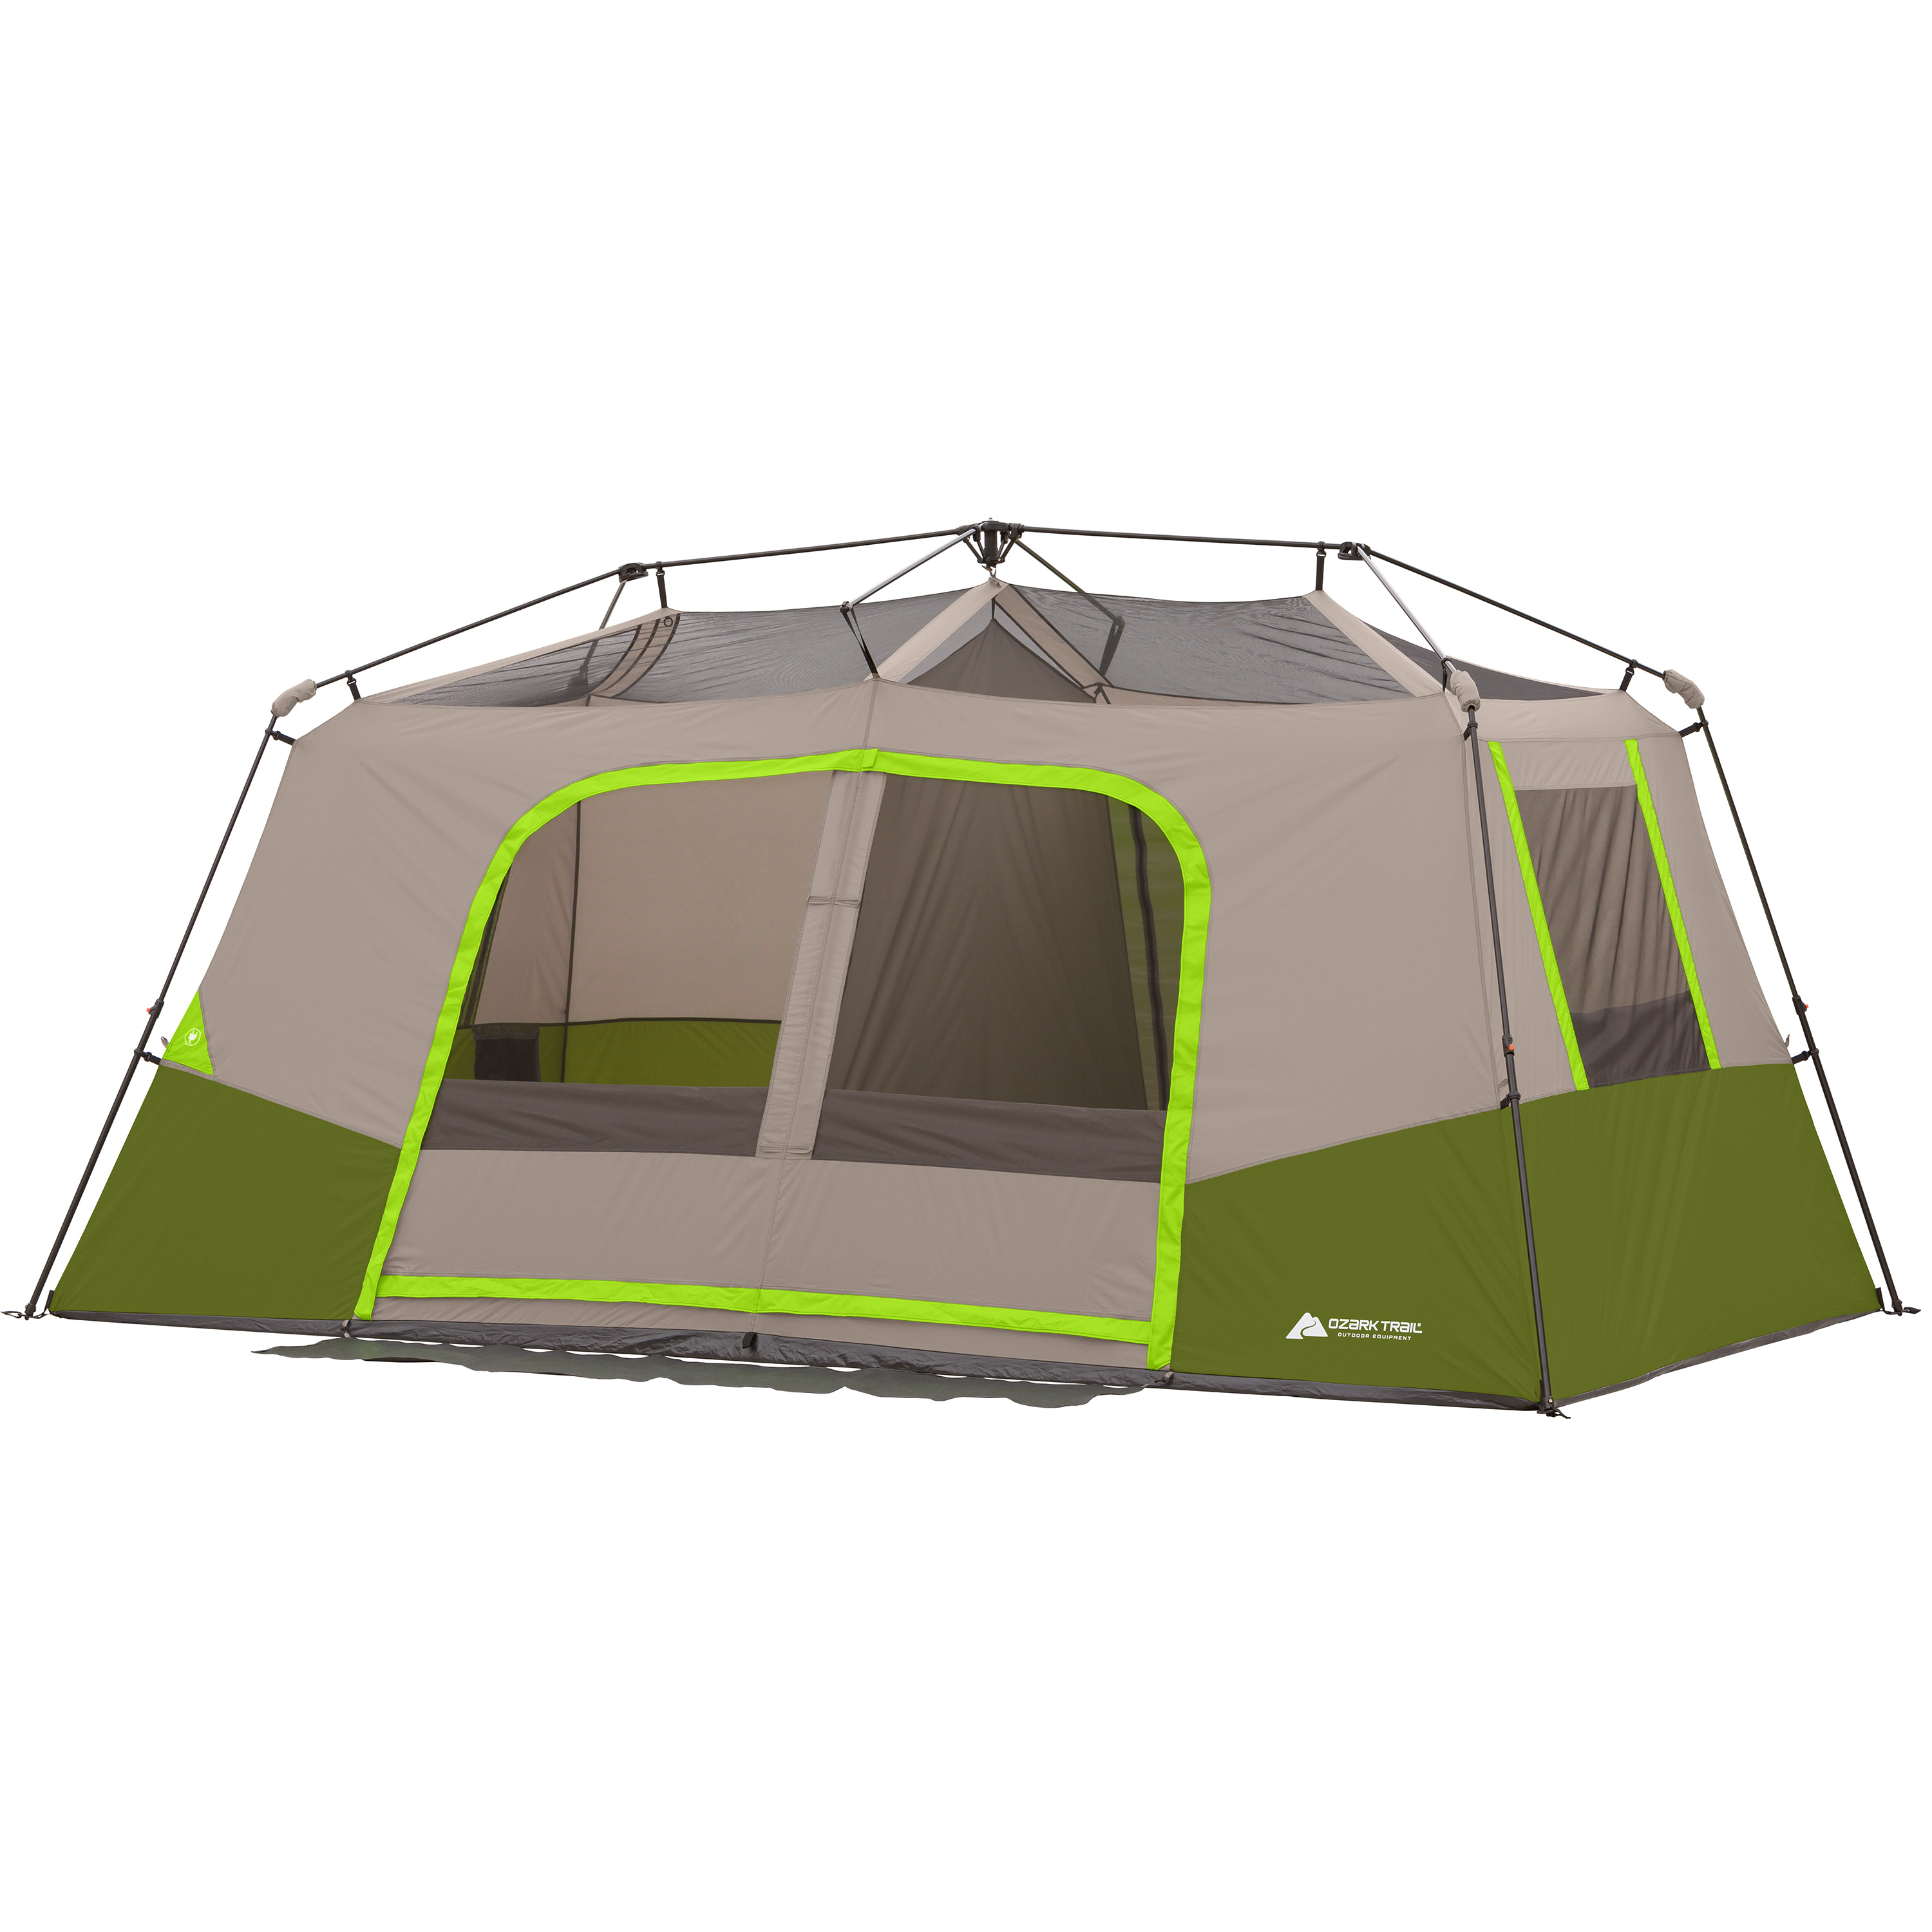 Ozark Trail 11-Person Instant Cabin Tent with Private Room - image 3 of 8